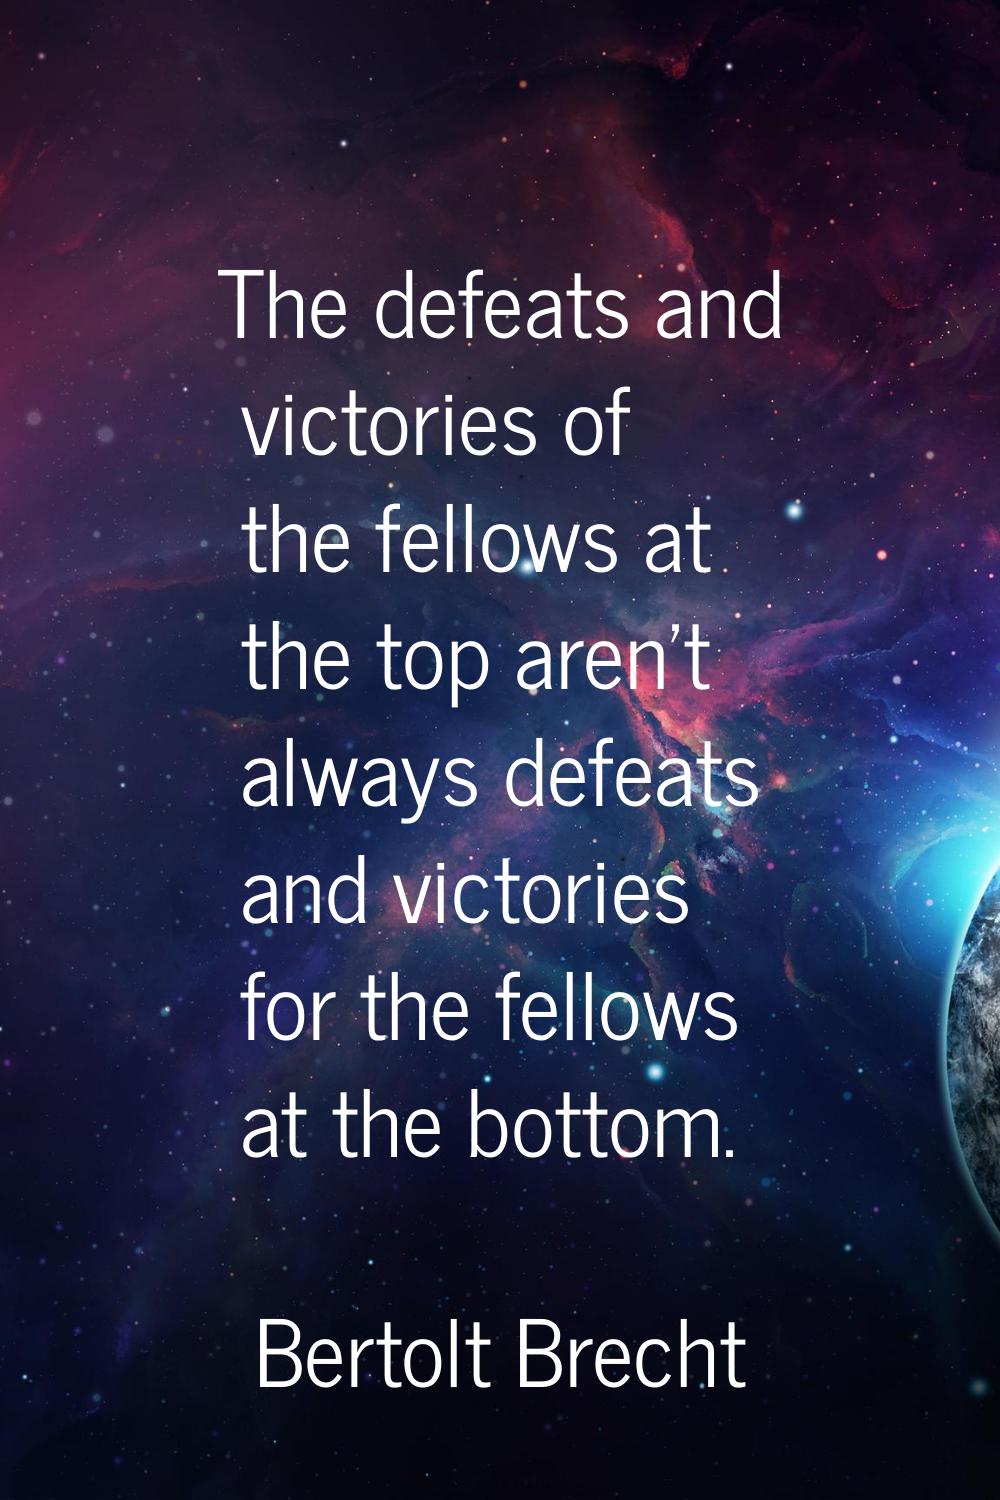 The defeats and victories of the fellows at the top aren't always defeats and victories for the fel